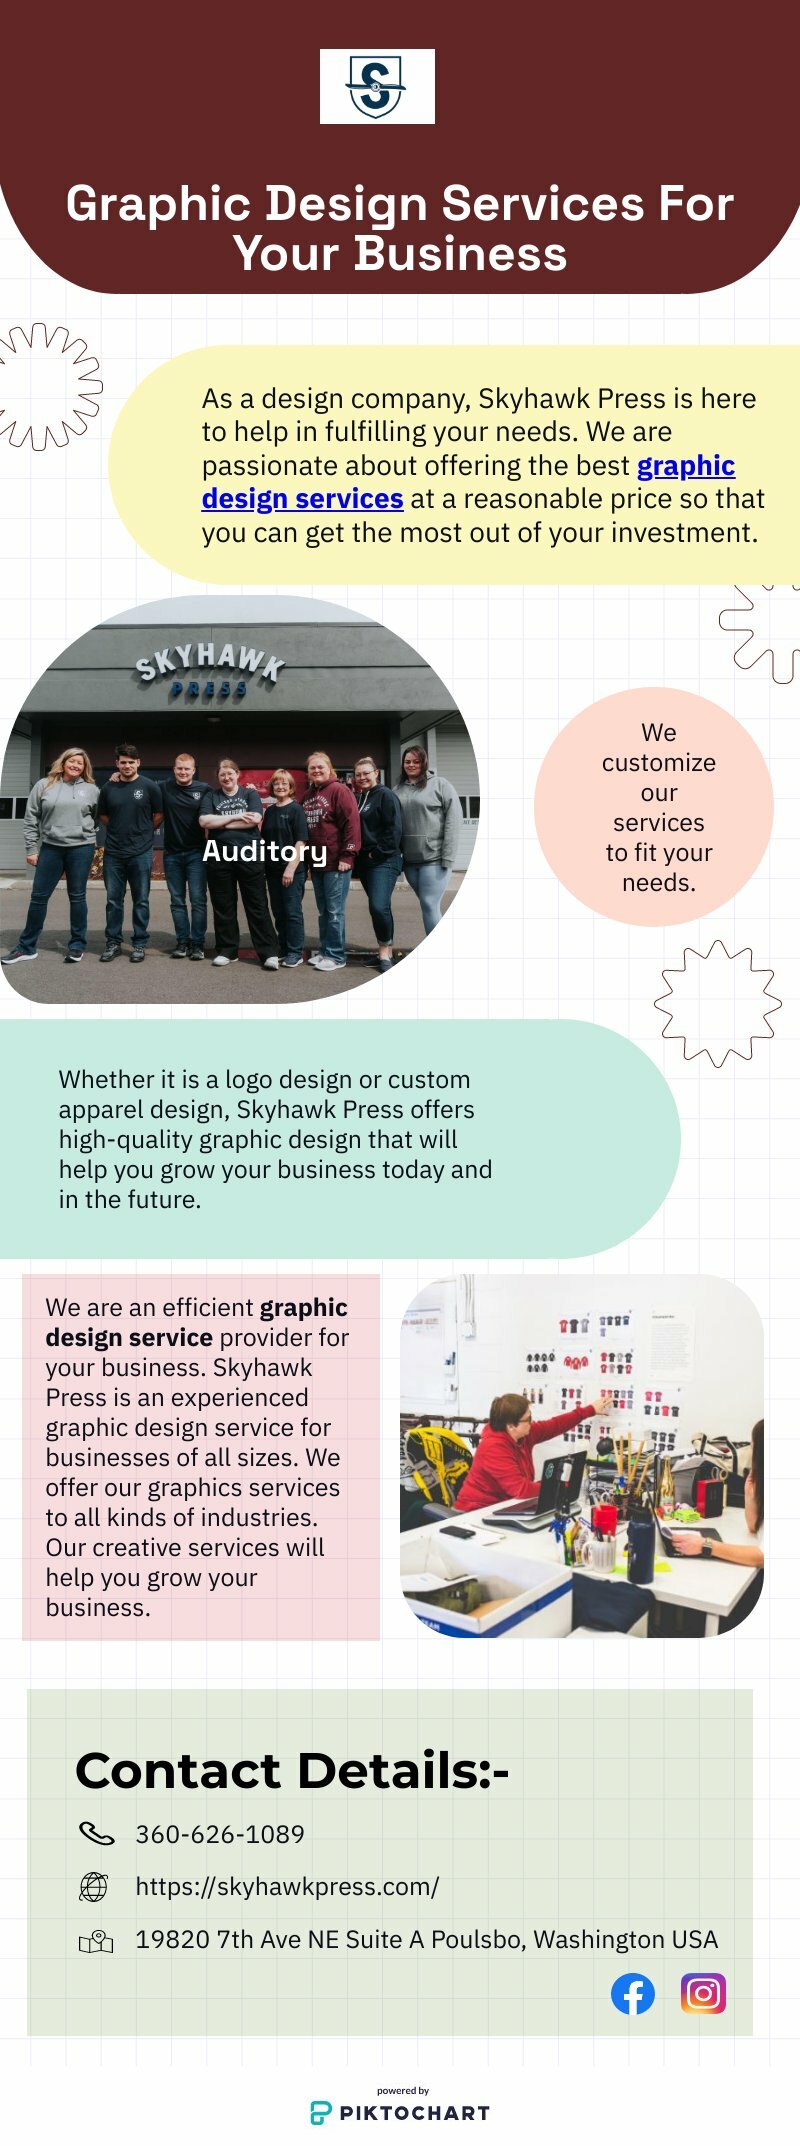 Graphic Design Services For Your Business